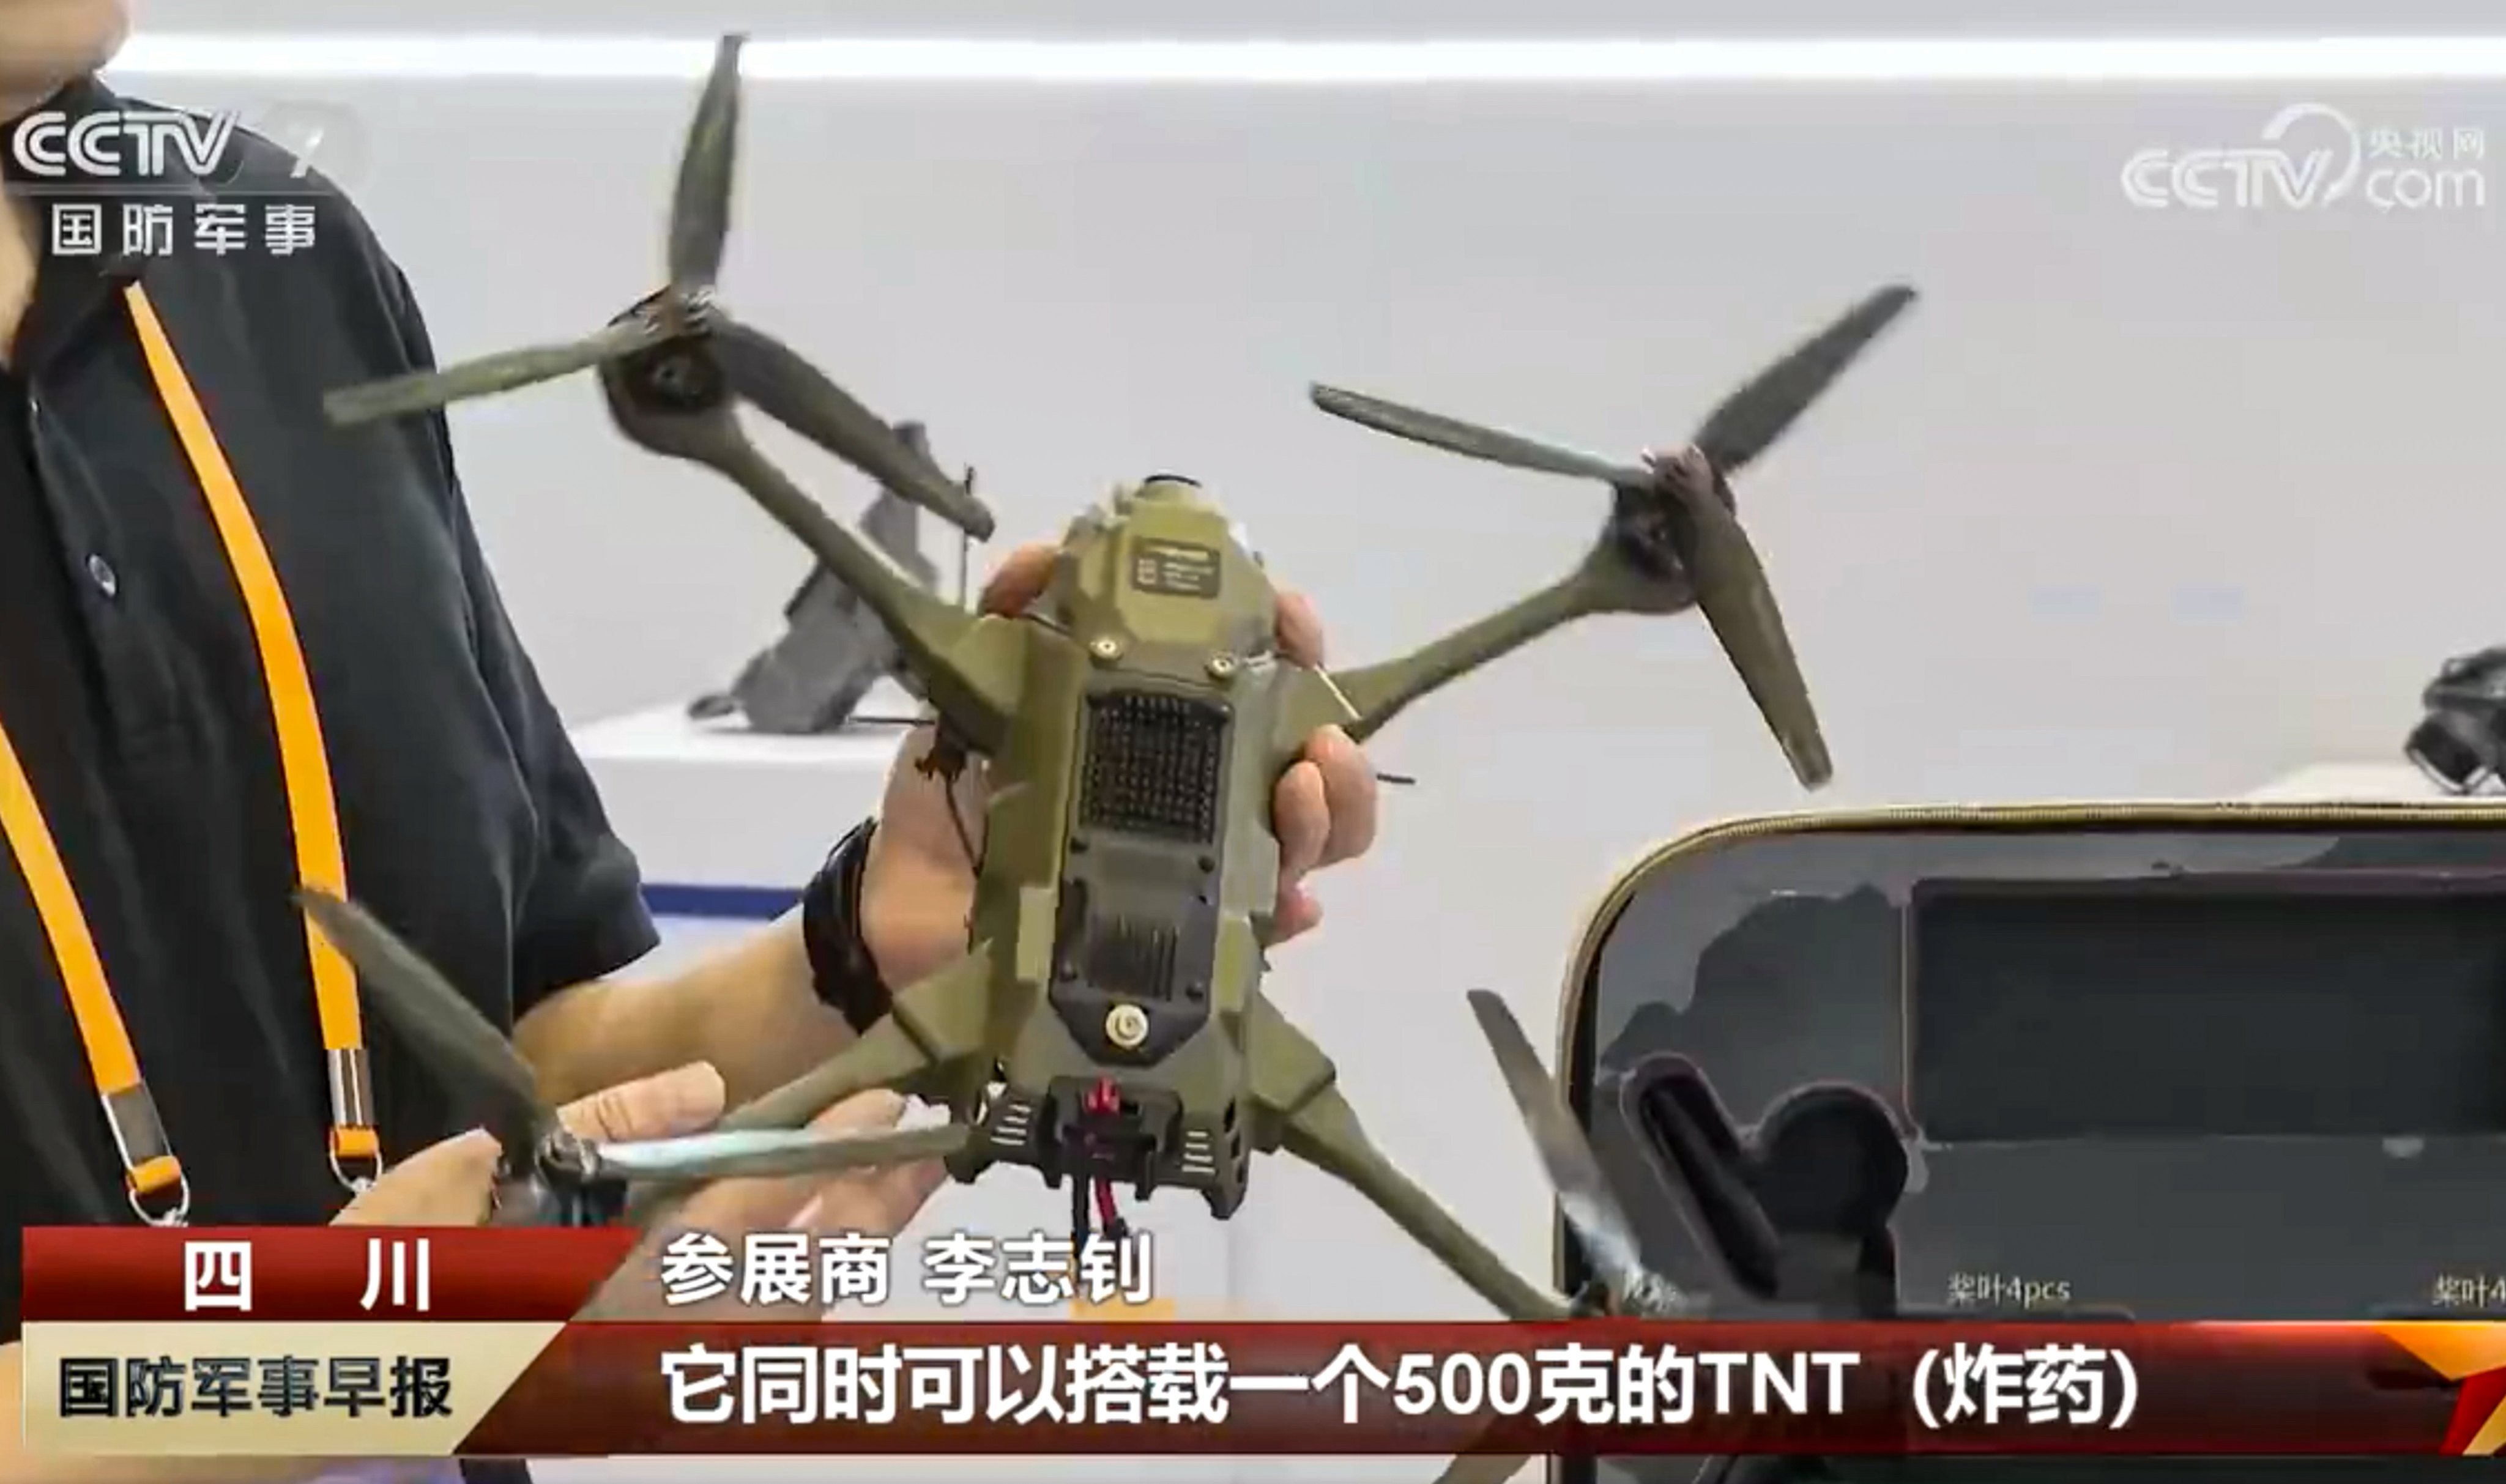 A small high-speed “suicide” drone on display at an exhibition in southwestern China. Photo: CCTV. 